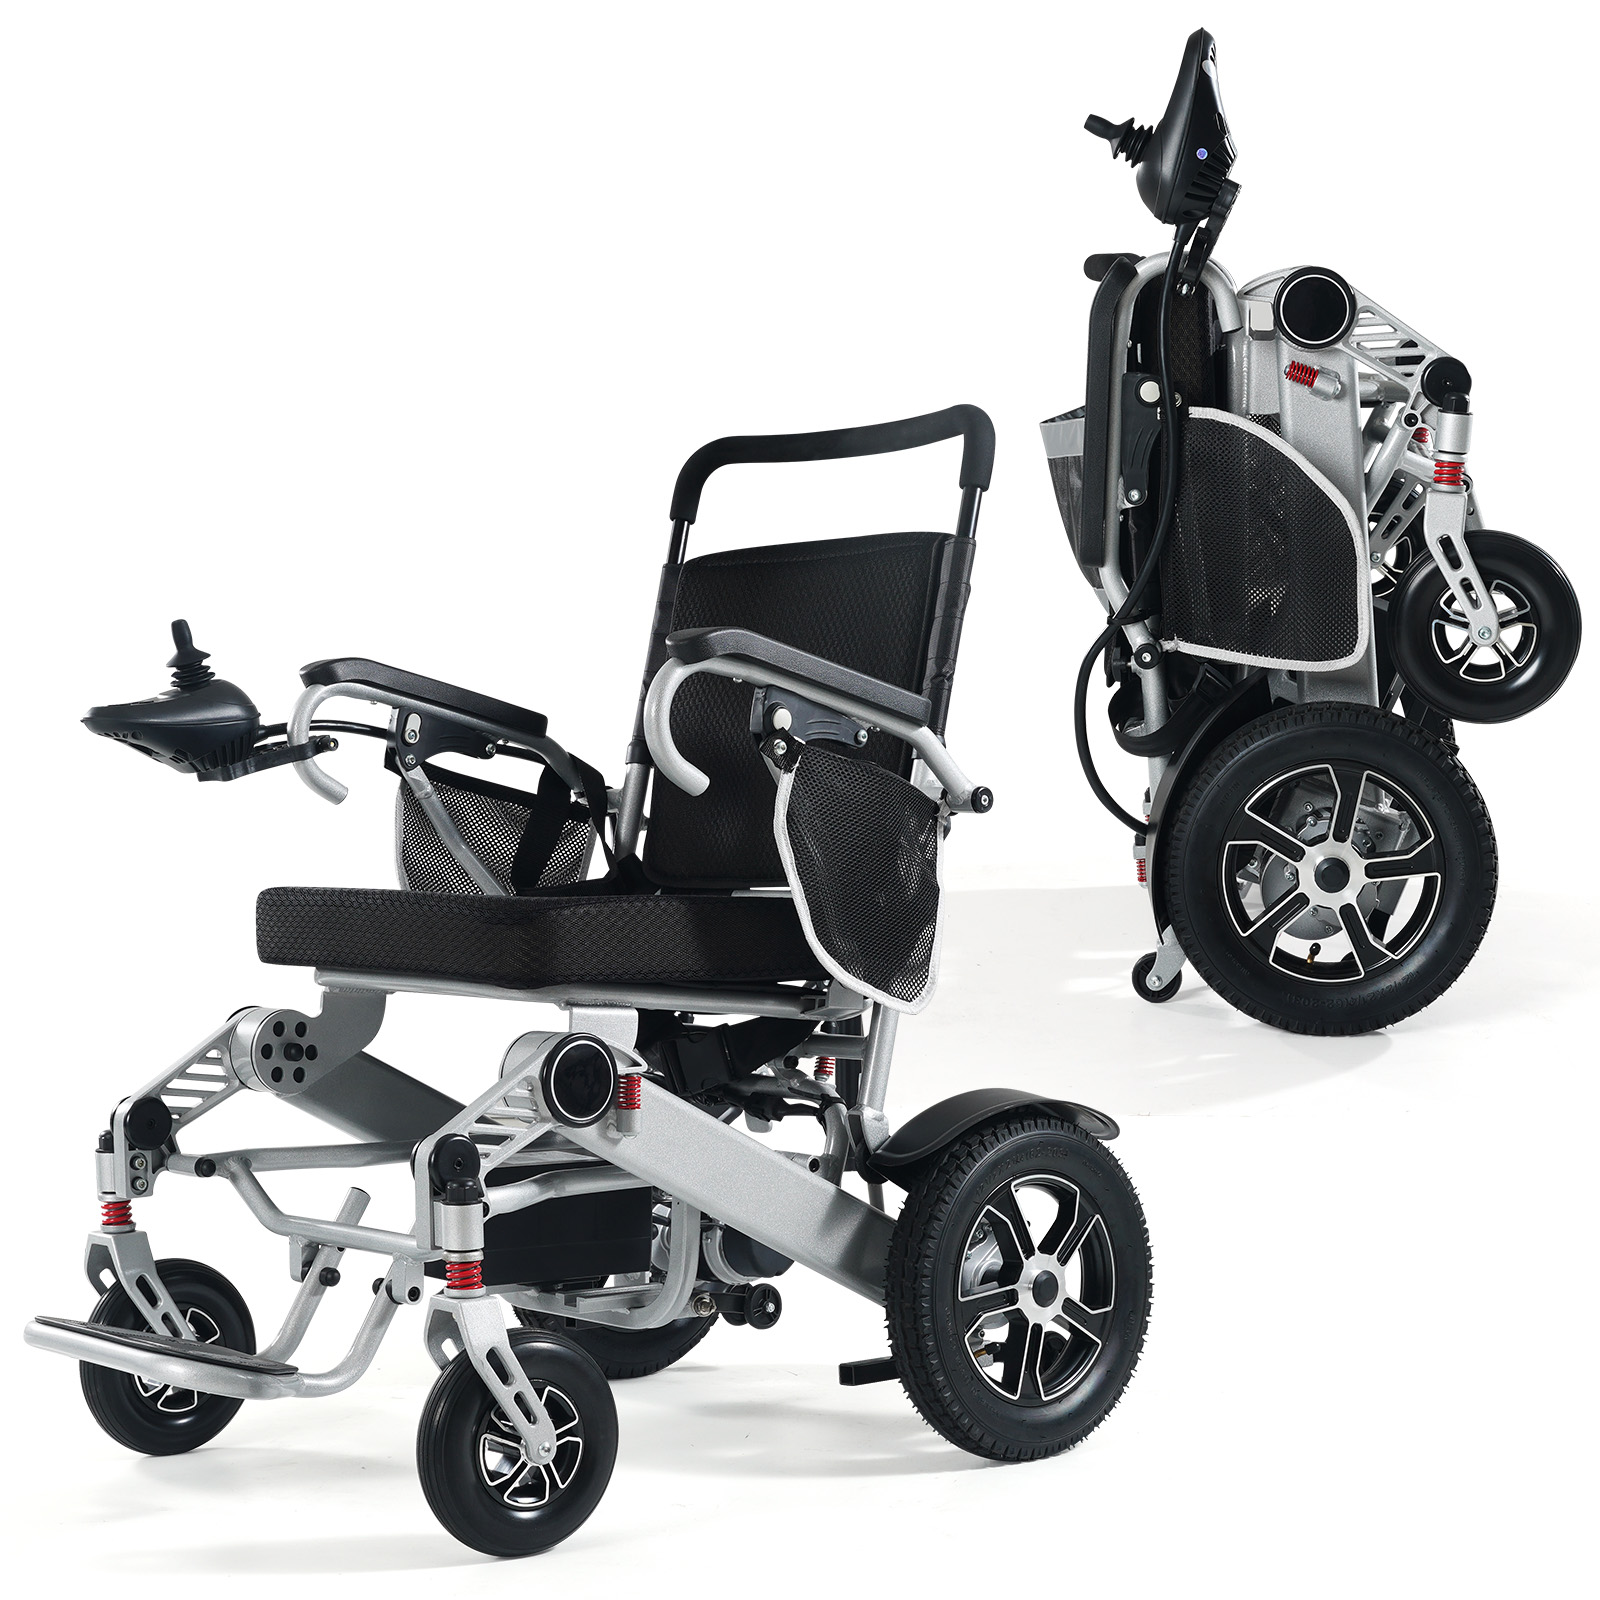 BALICHUN Lightweight Foldable Electric Wheelchair, Silver Color, Compact Size Wheelchairs, Aviation Travel Approval - image 1 of 15